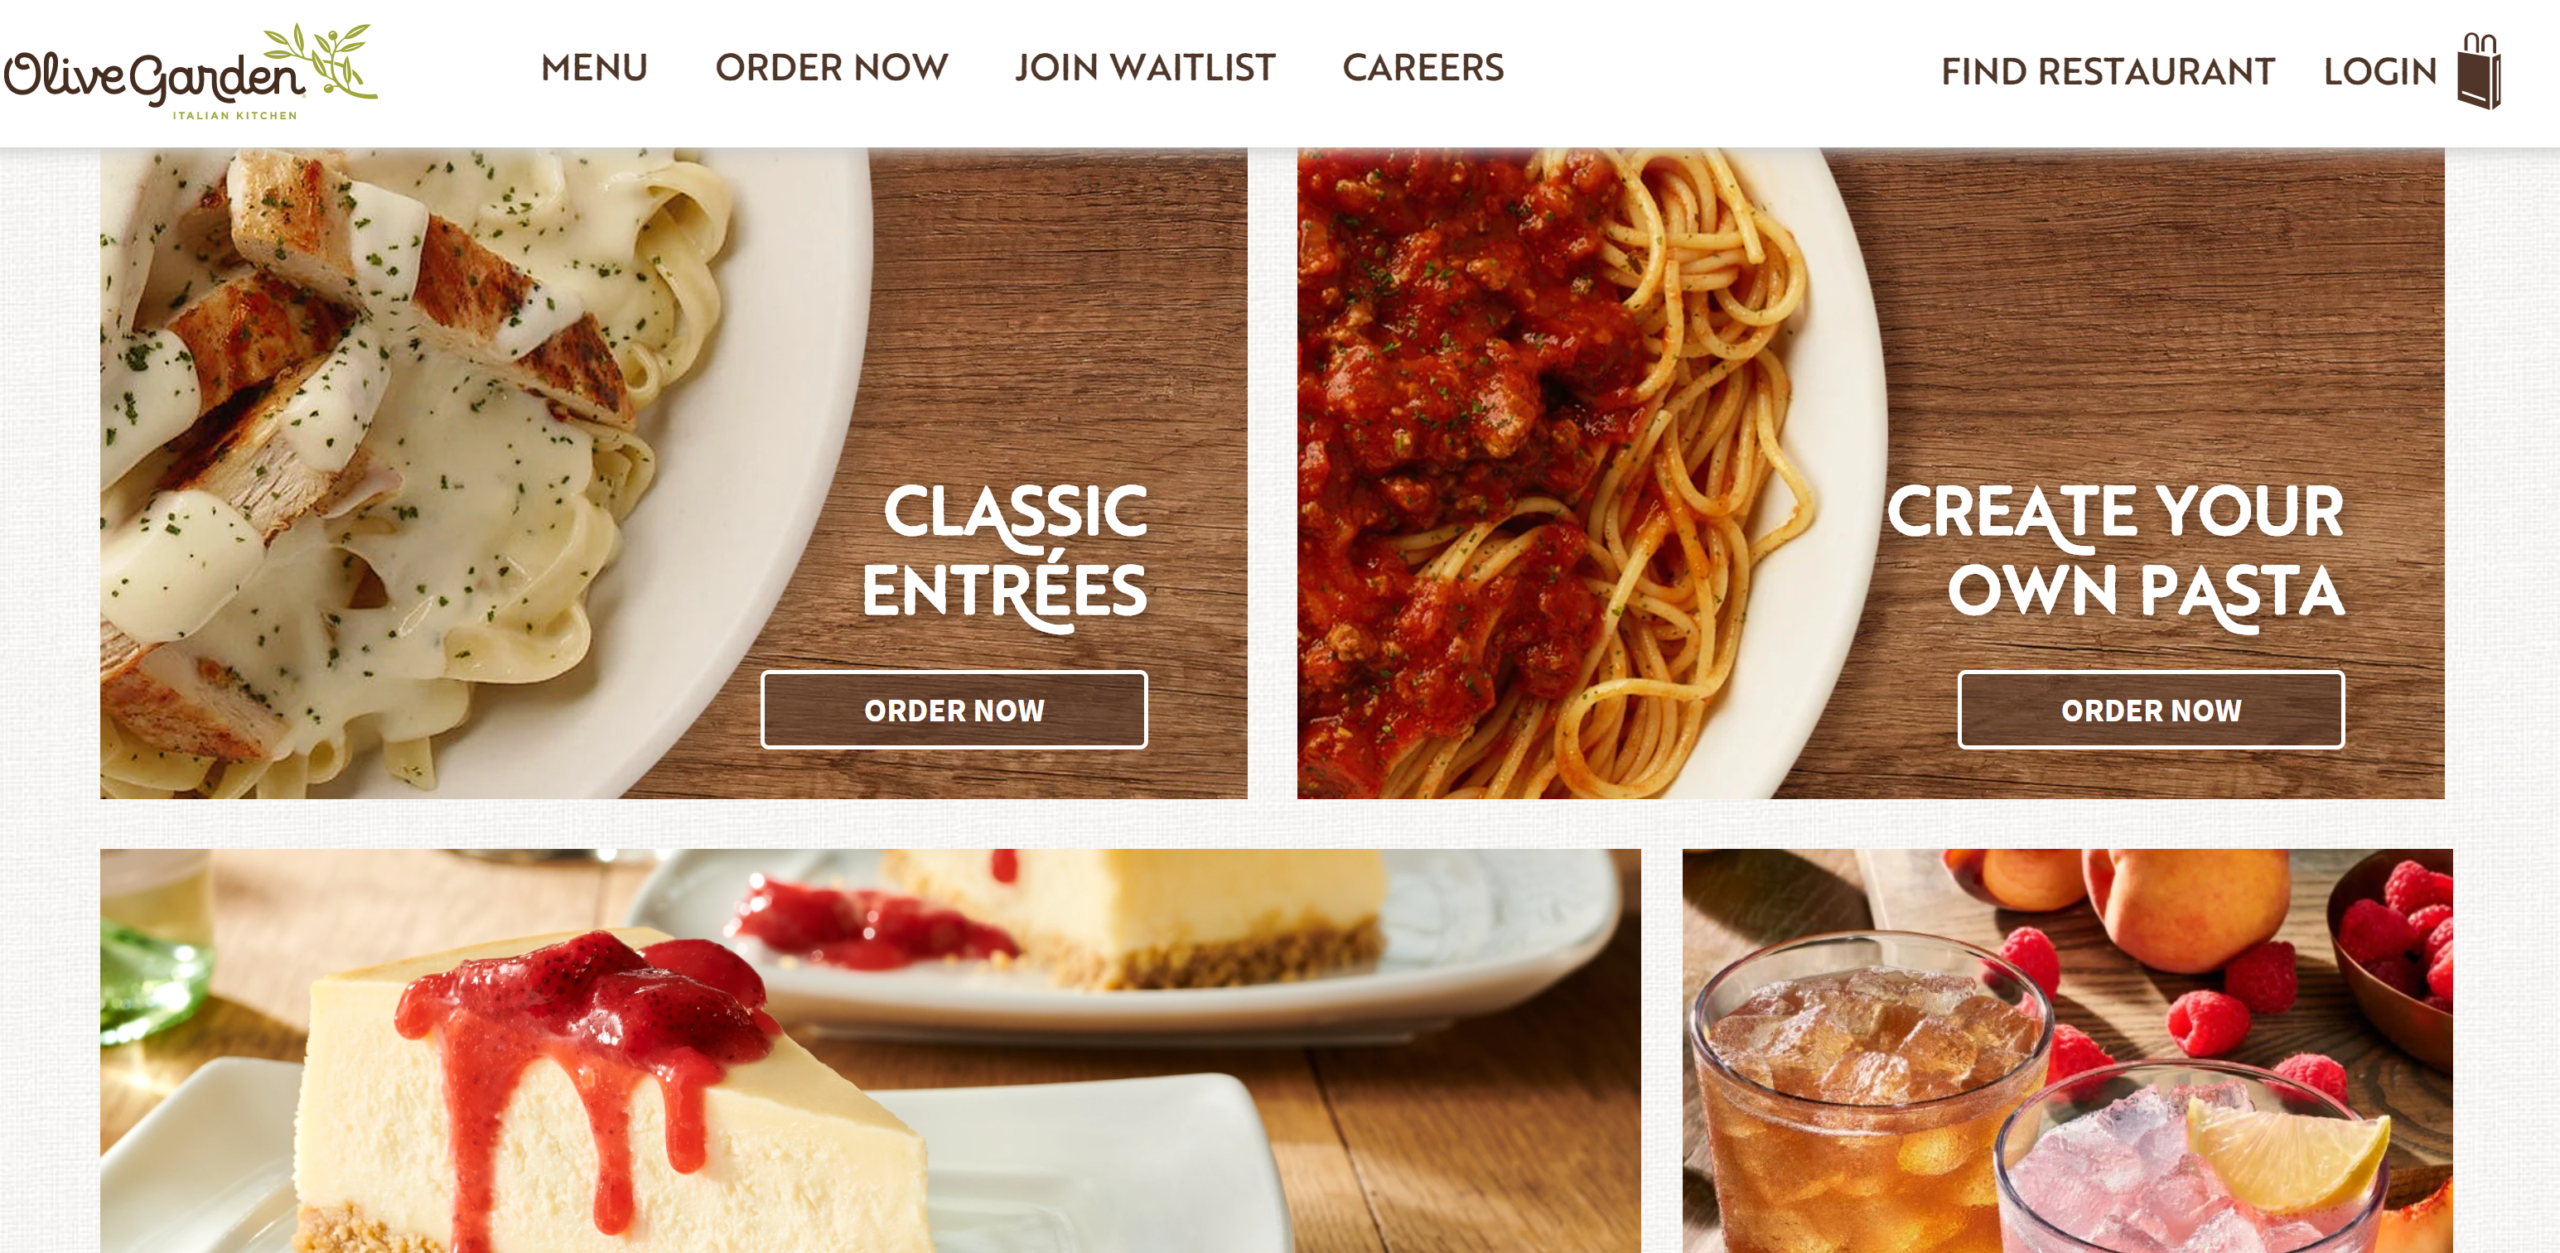 Olive Gardens Restaurant - order food without standing in long lines